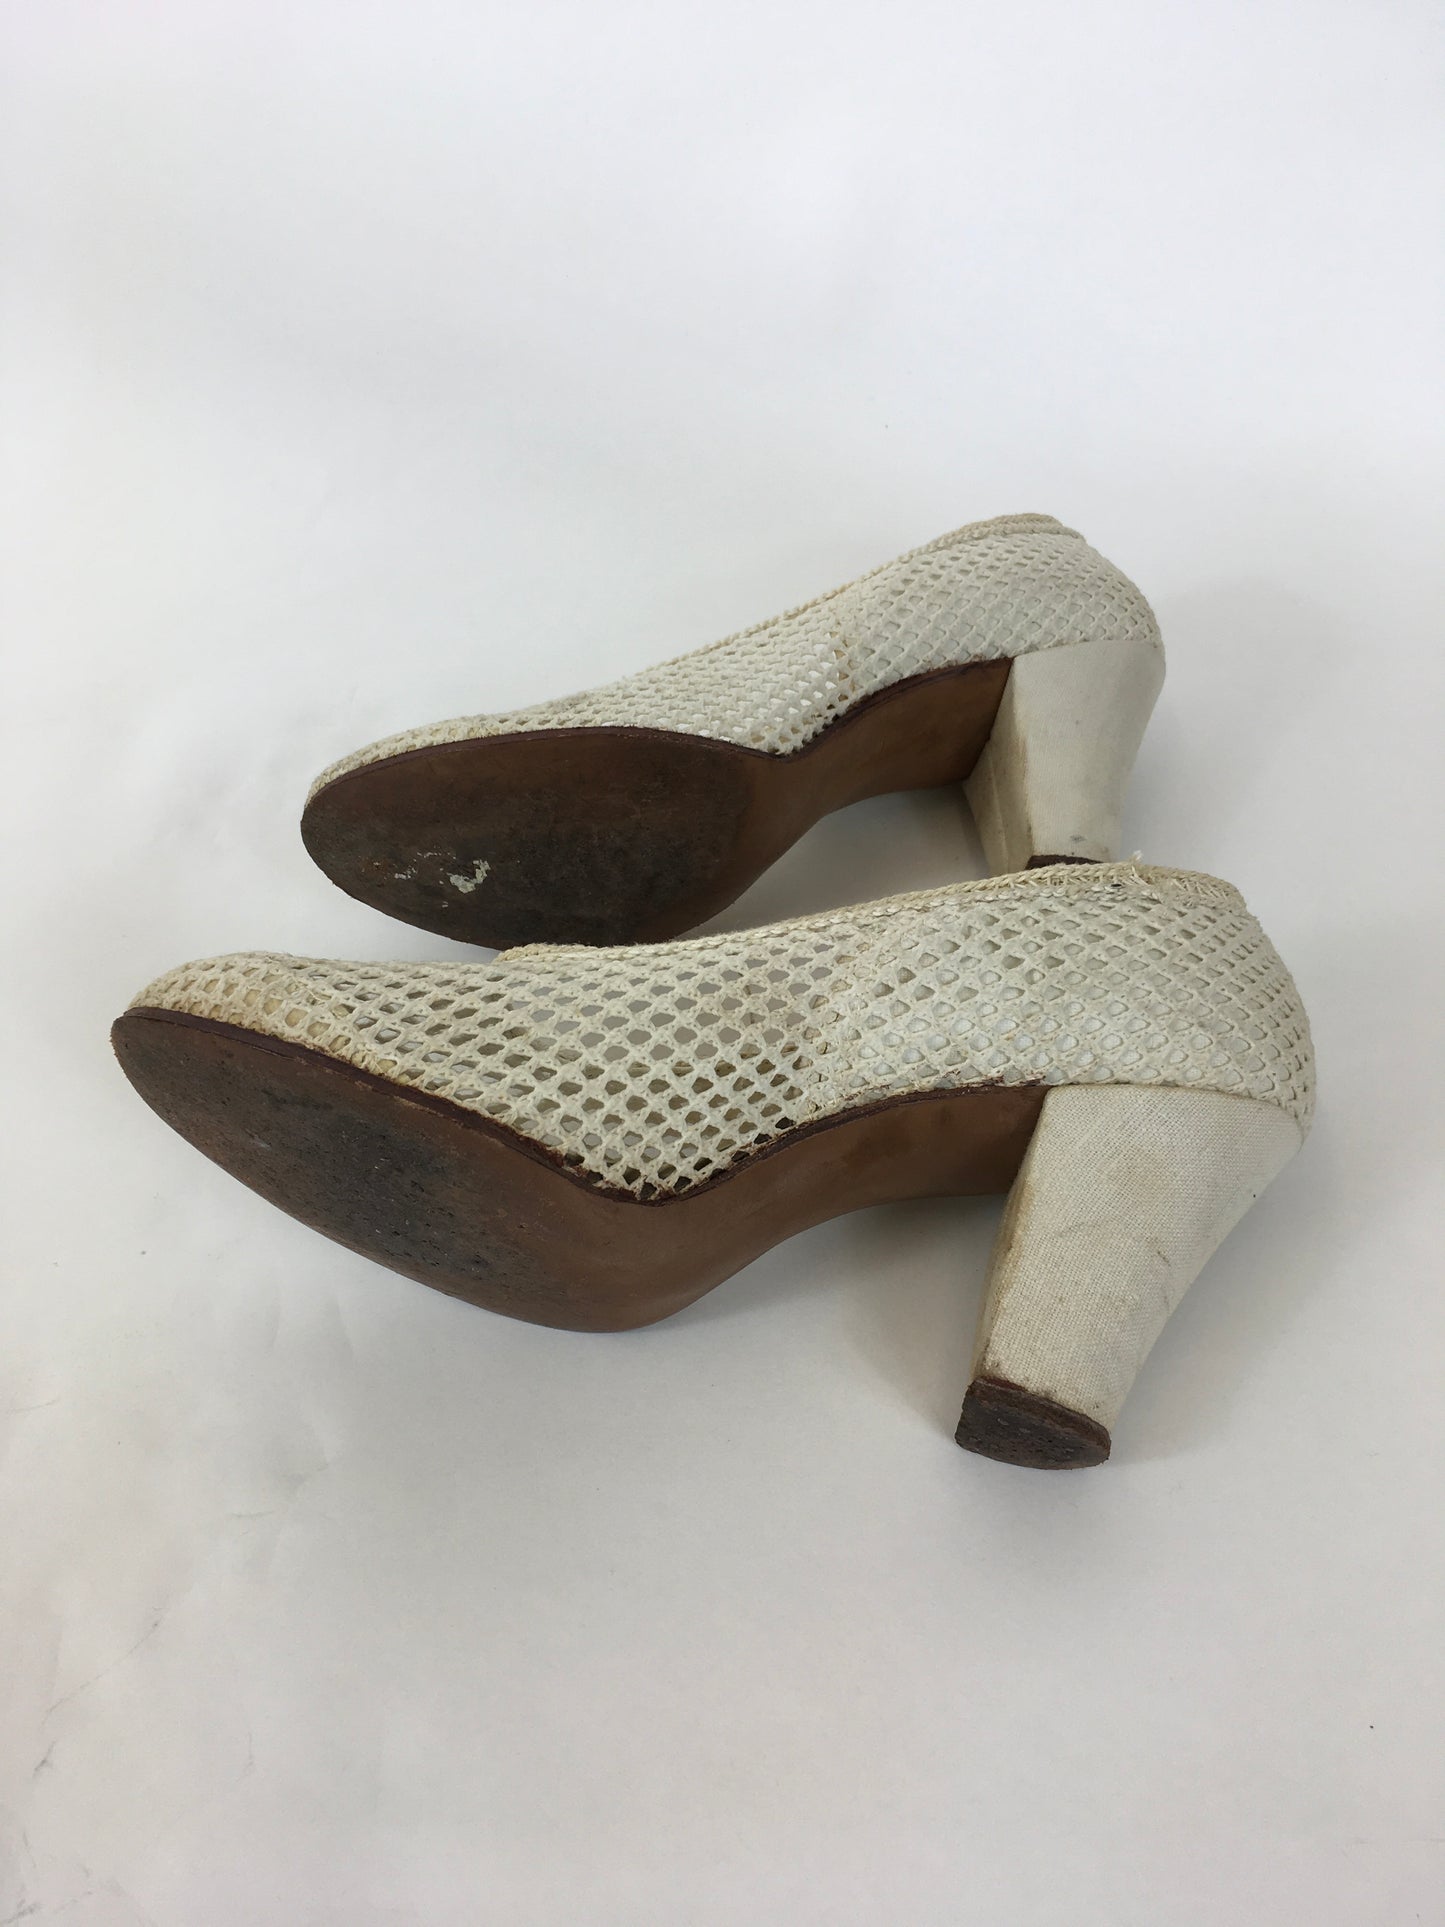 Original 1940’s Beautiful CC41 Utility Shoes - In An Off White Fabric Cloth